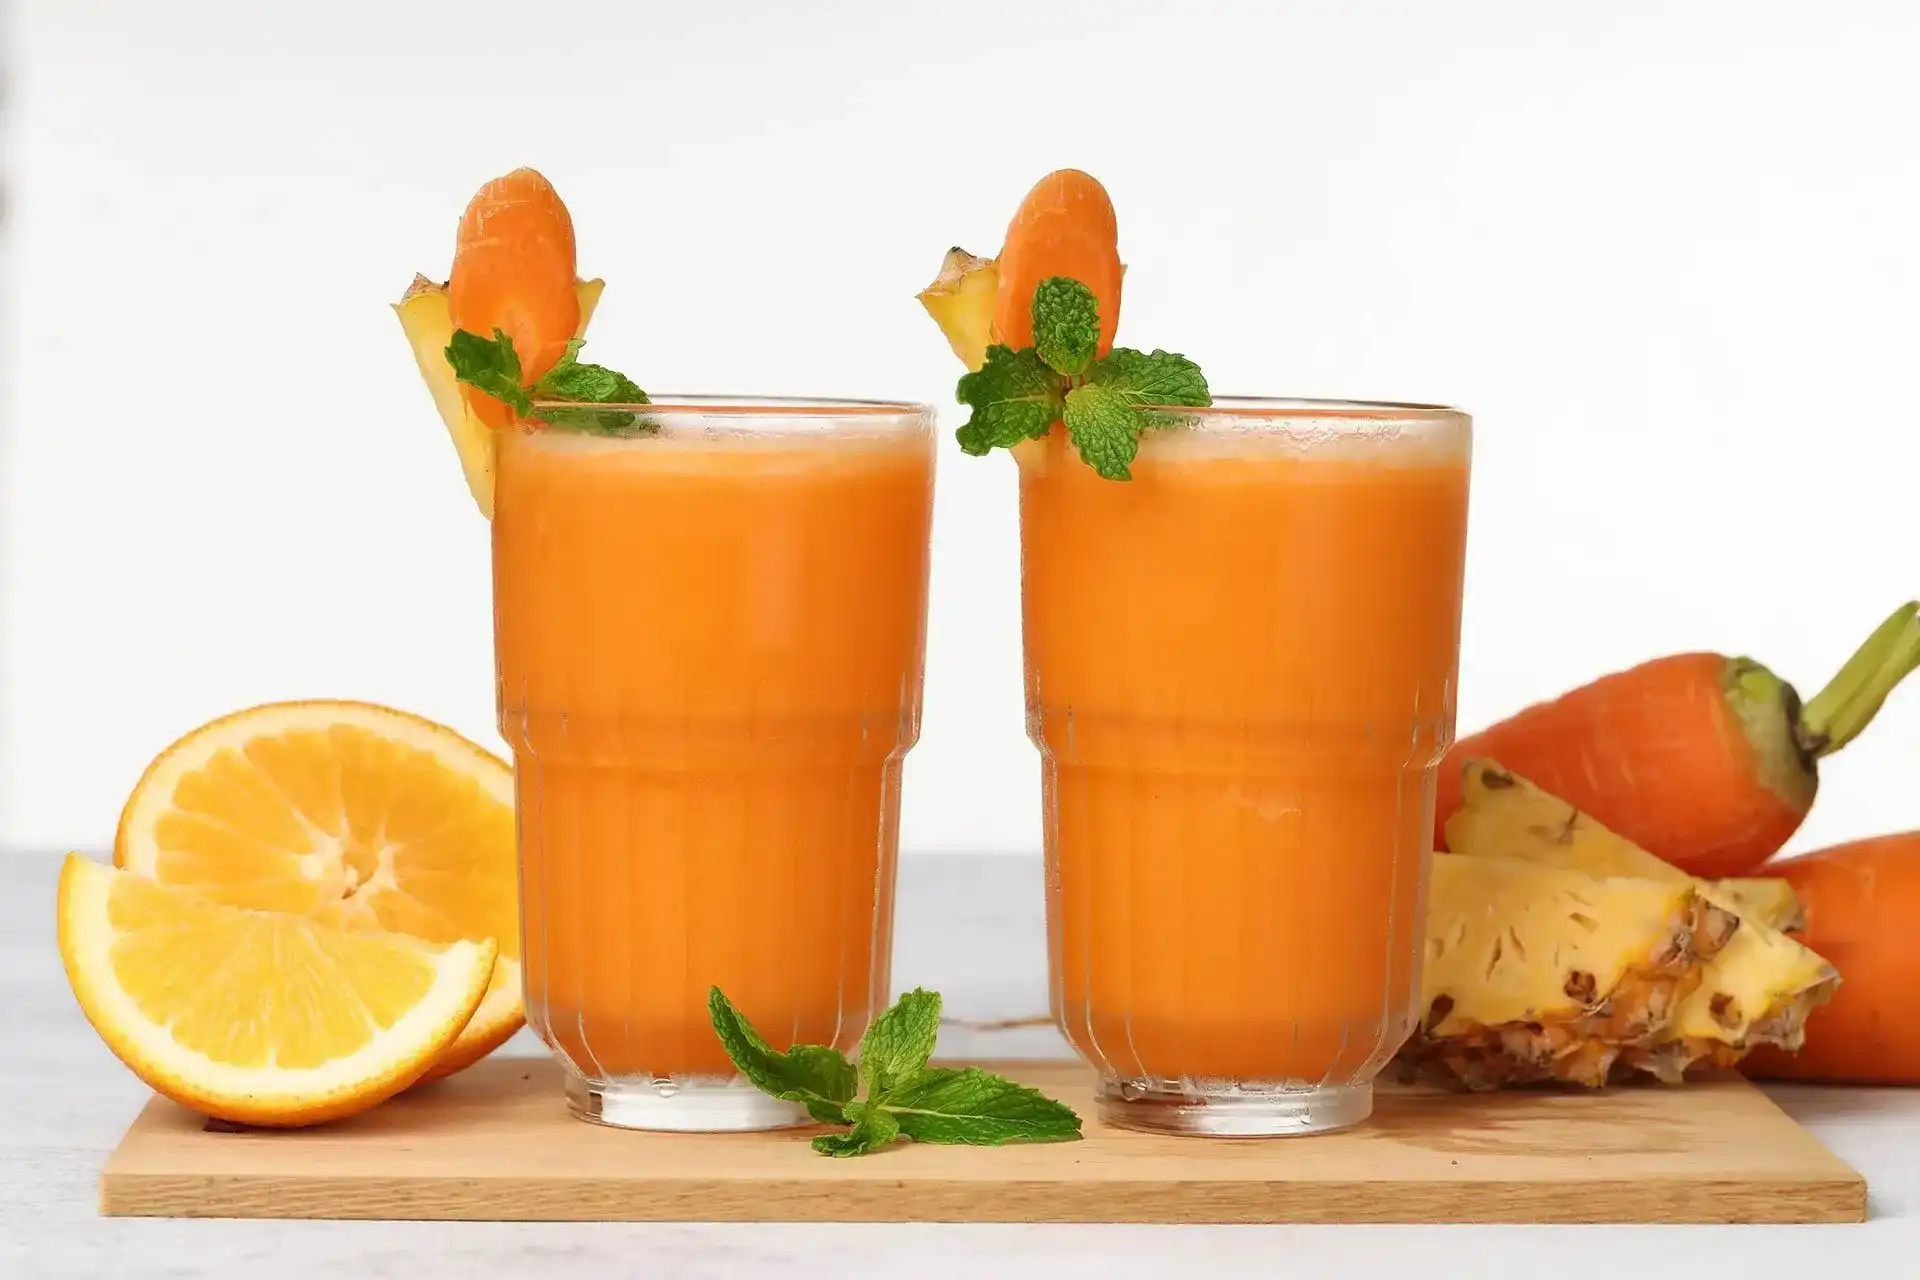 Carrot Smoothie Recipe: A Healthy Drink With a Summery Flavor